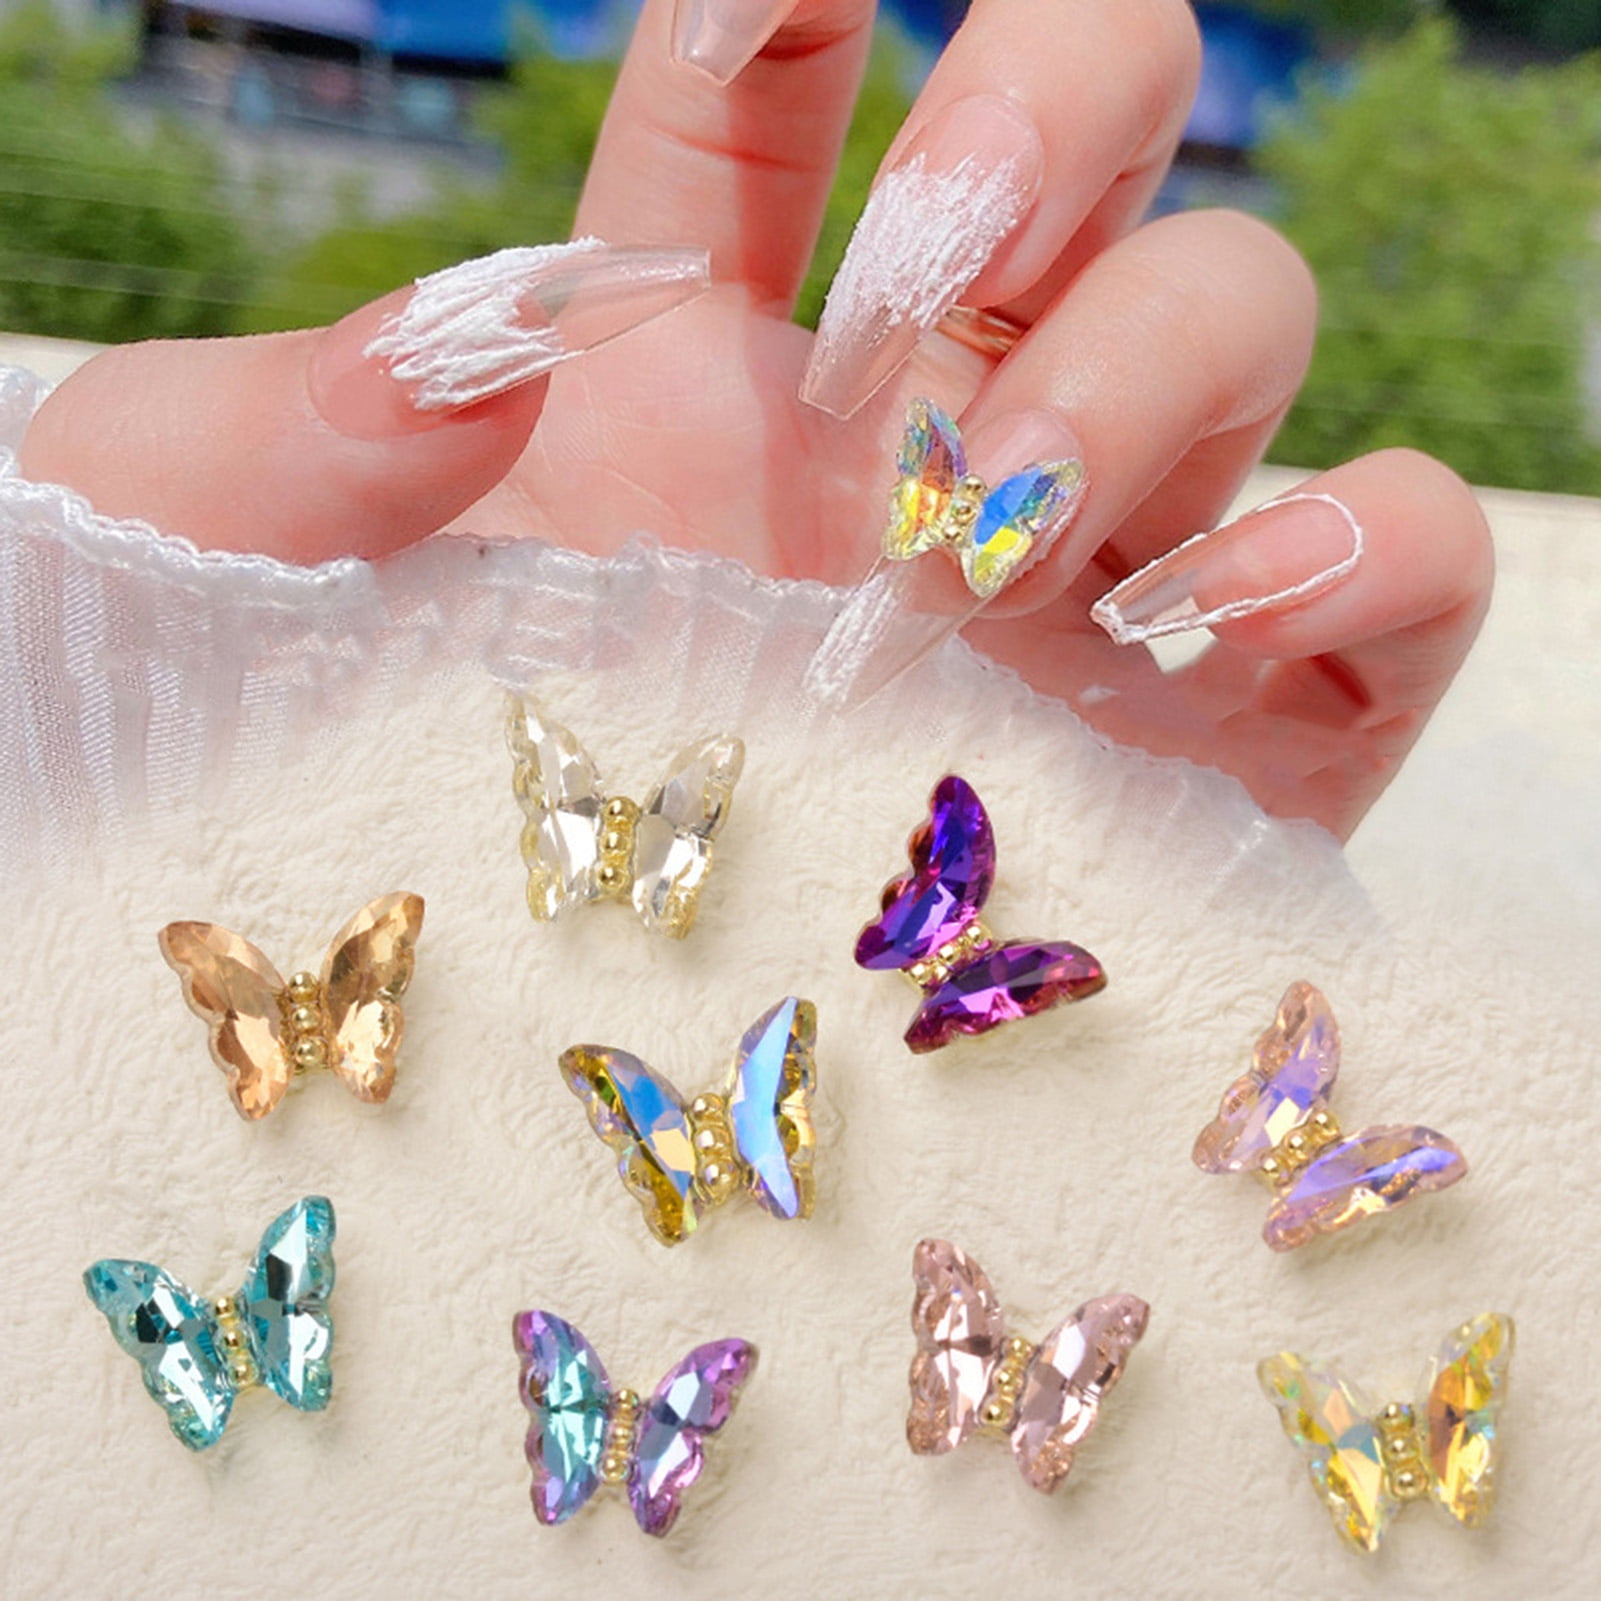 Juome Nail Charms, 30 Pcs Butterfly Nail Charms 3D Butterflies